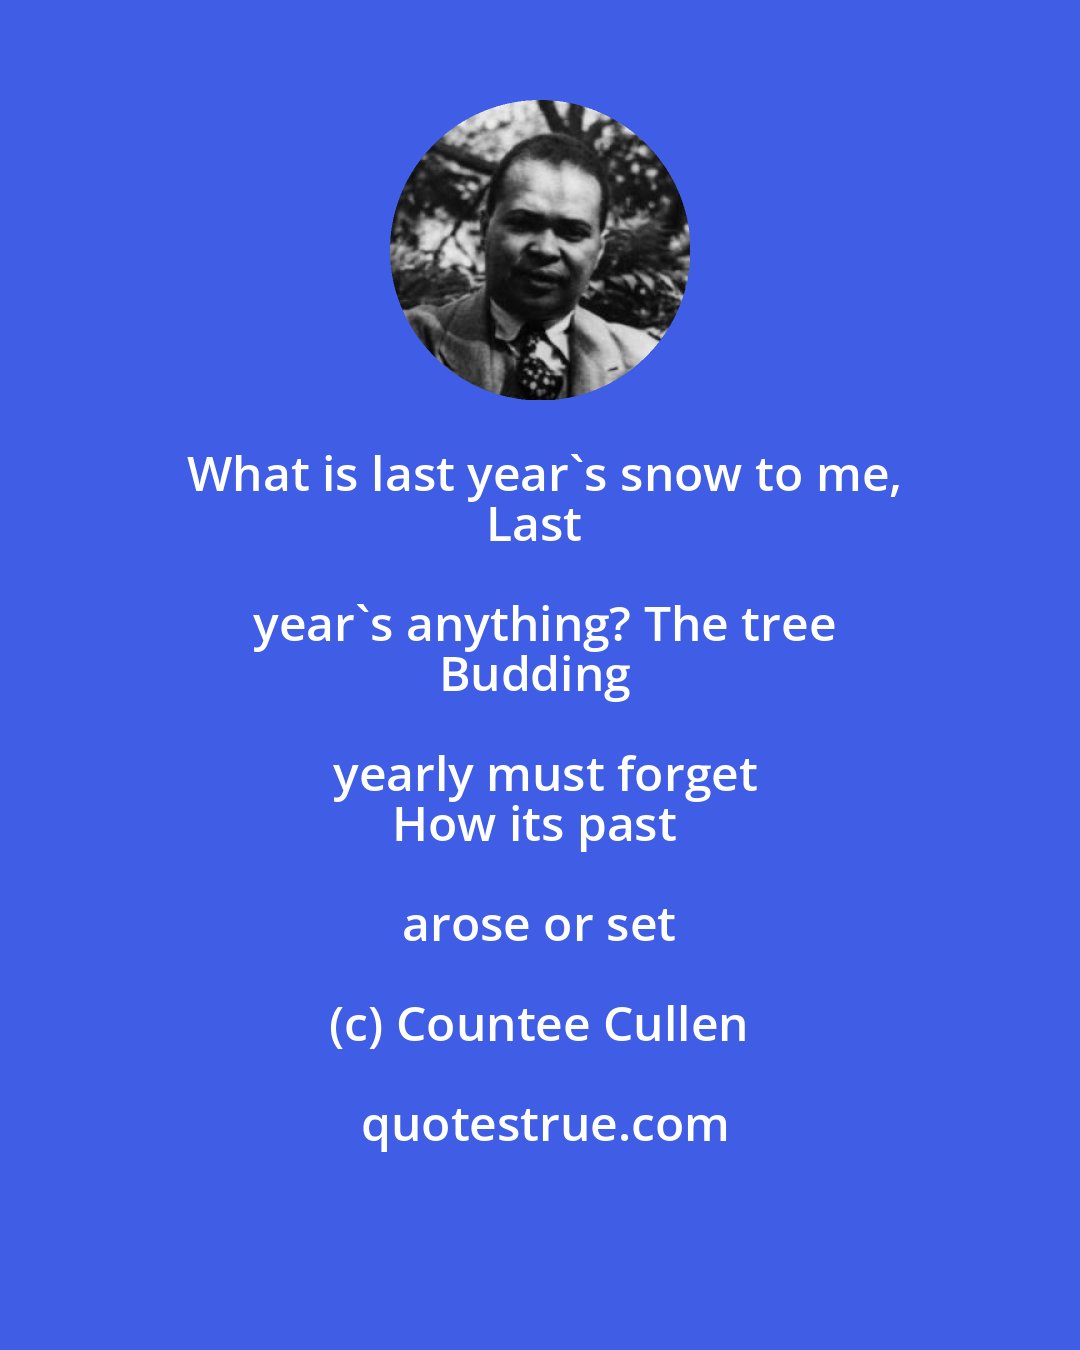 Countee Cullen: What is last year's snow to me,
Last year's anything? The tree
Budding yearly must forget
How its past arose or set